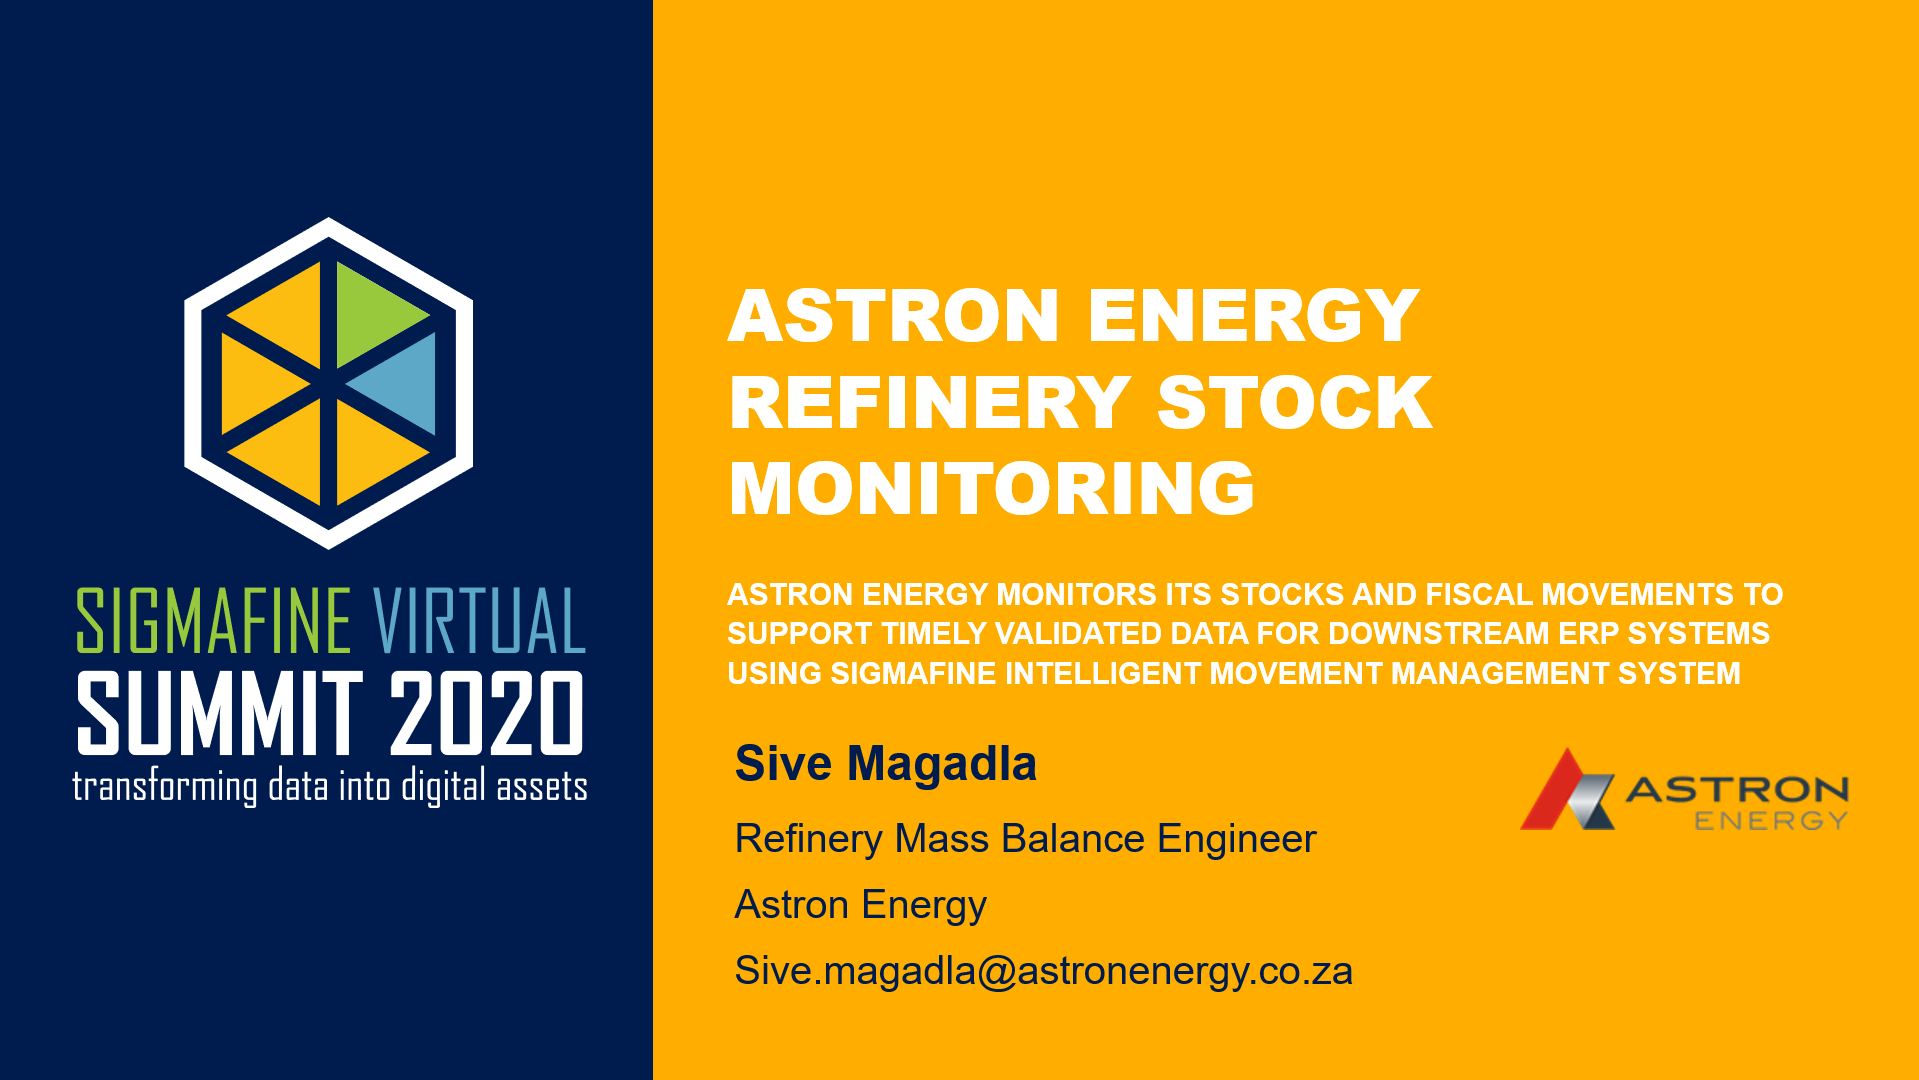 Monitoring stocks and fiscal movements to supply timely integration to Astron Energy ERP using Sigmafine IMM